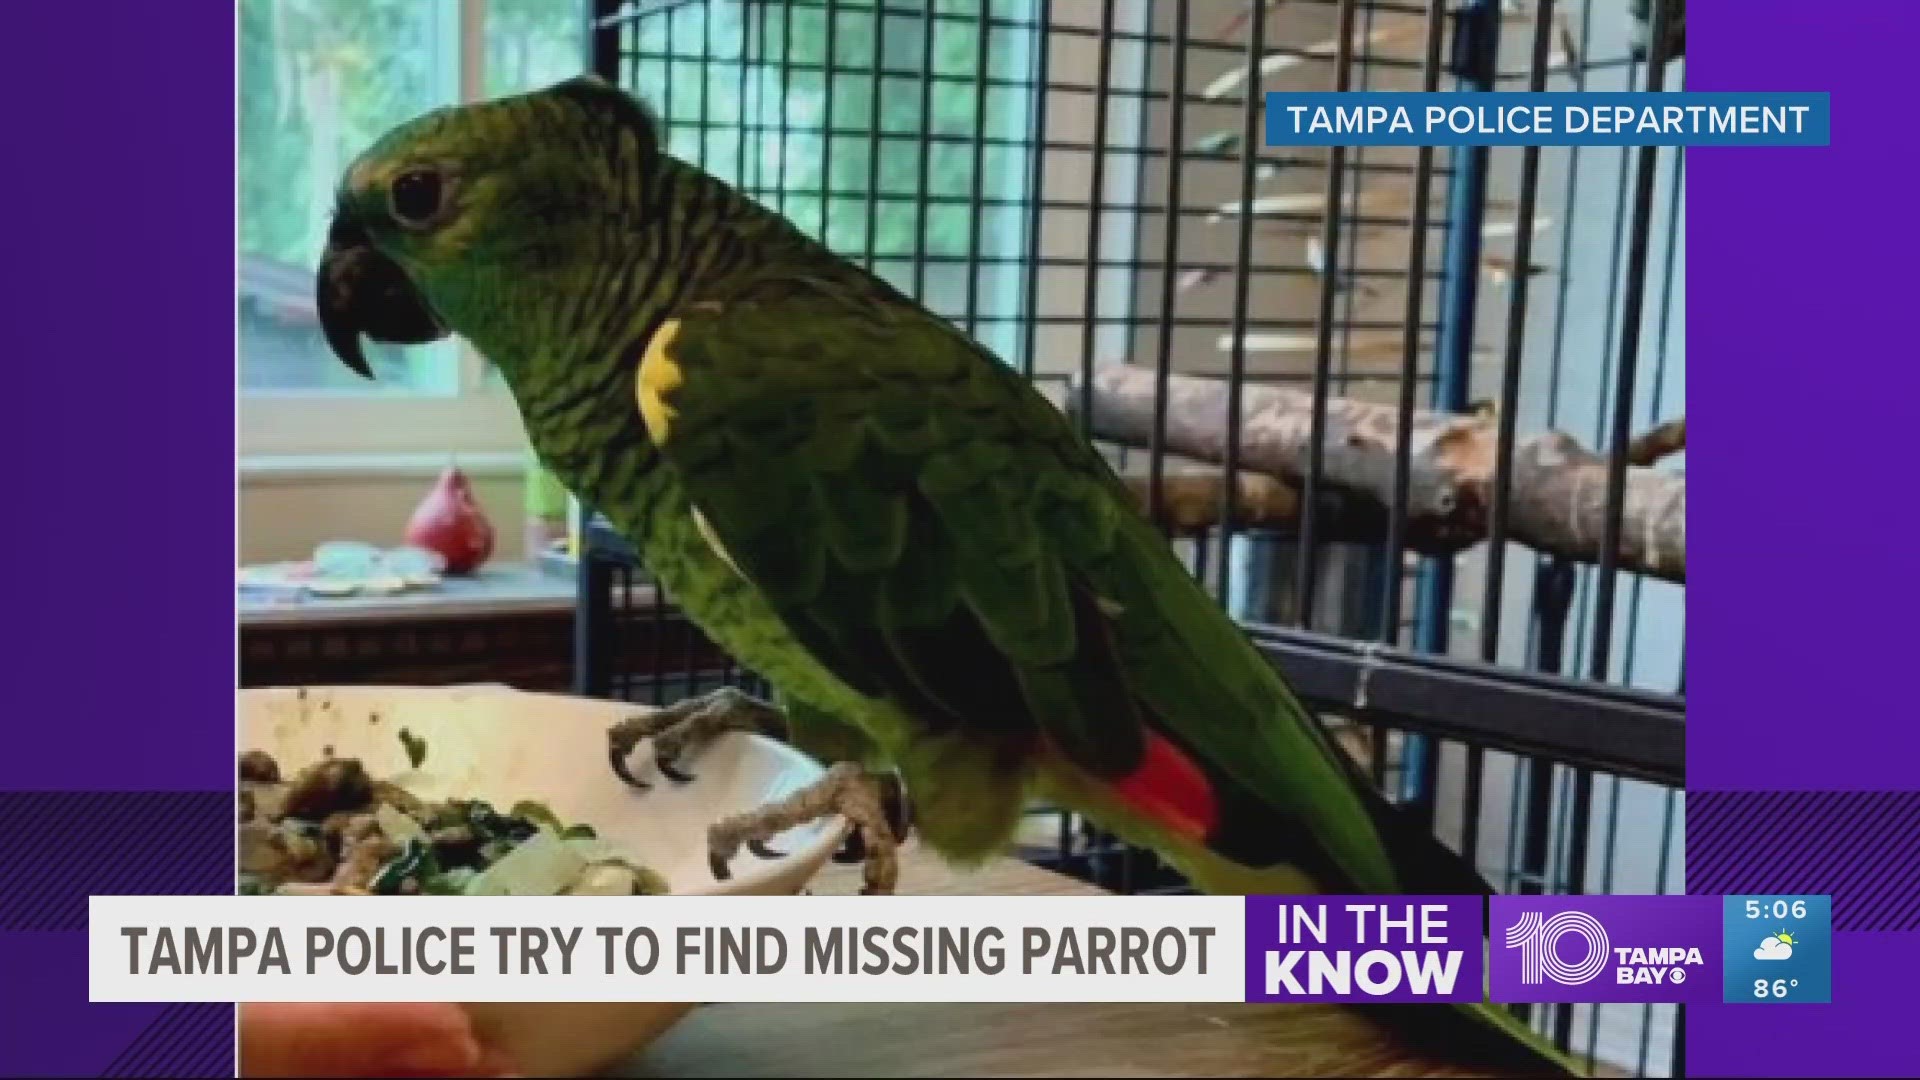 Authorities say back on March 18 the unknown woman took two Blue-fronter Amazon parrots, Tito and Mama.